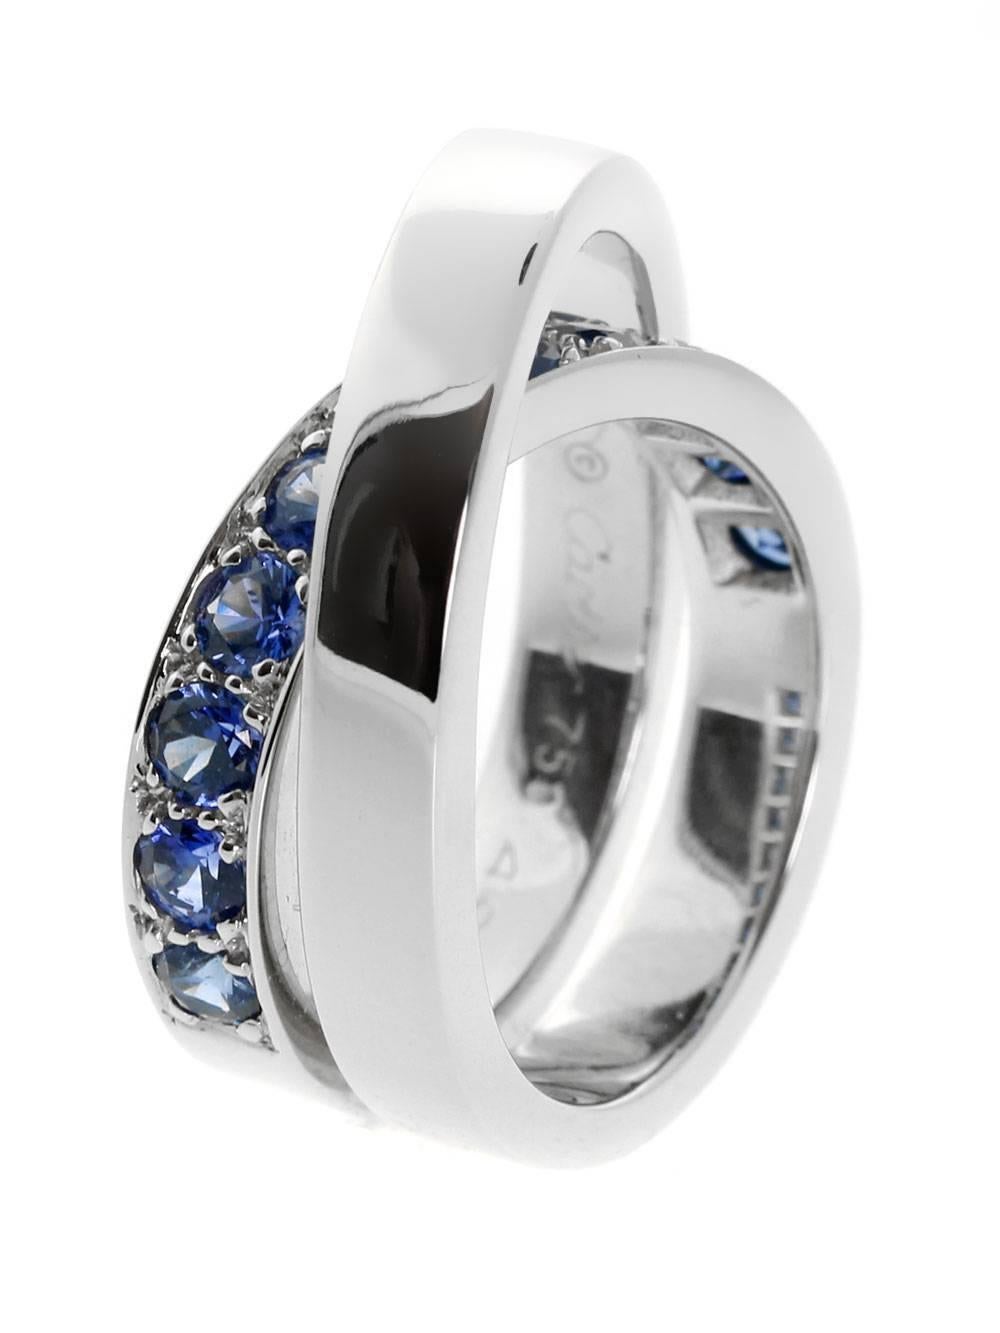 Subtly and style come together in Cartier’s Sapphire Nouvelle Vague Ring. Made from 18-karat white gold and featuring blue sapphires, this Cartier ring displays elegance and class. Cartier’s artisans formed the ring’s setting into a distinctive